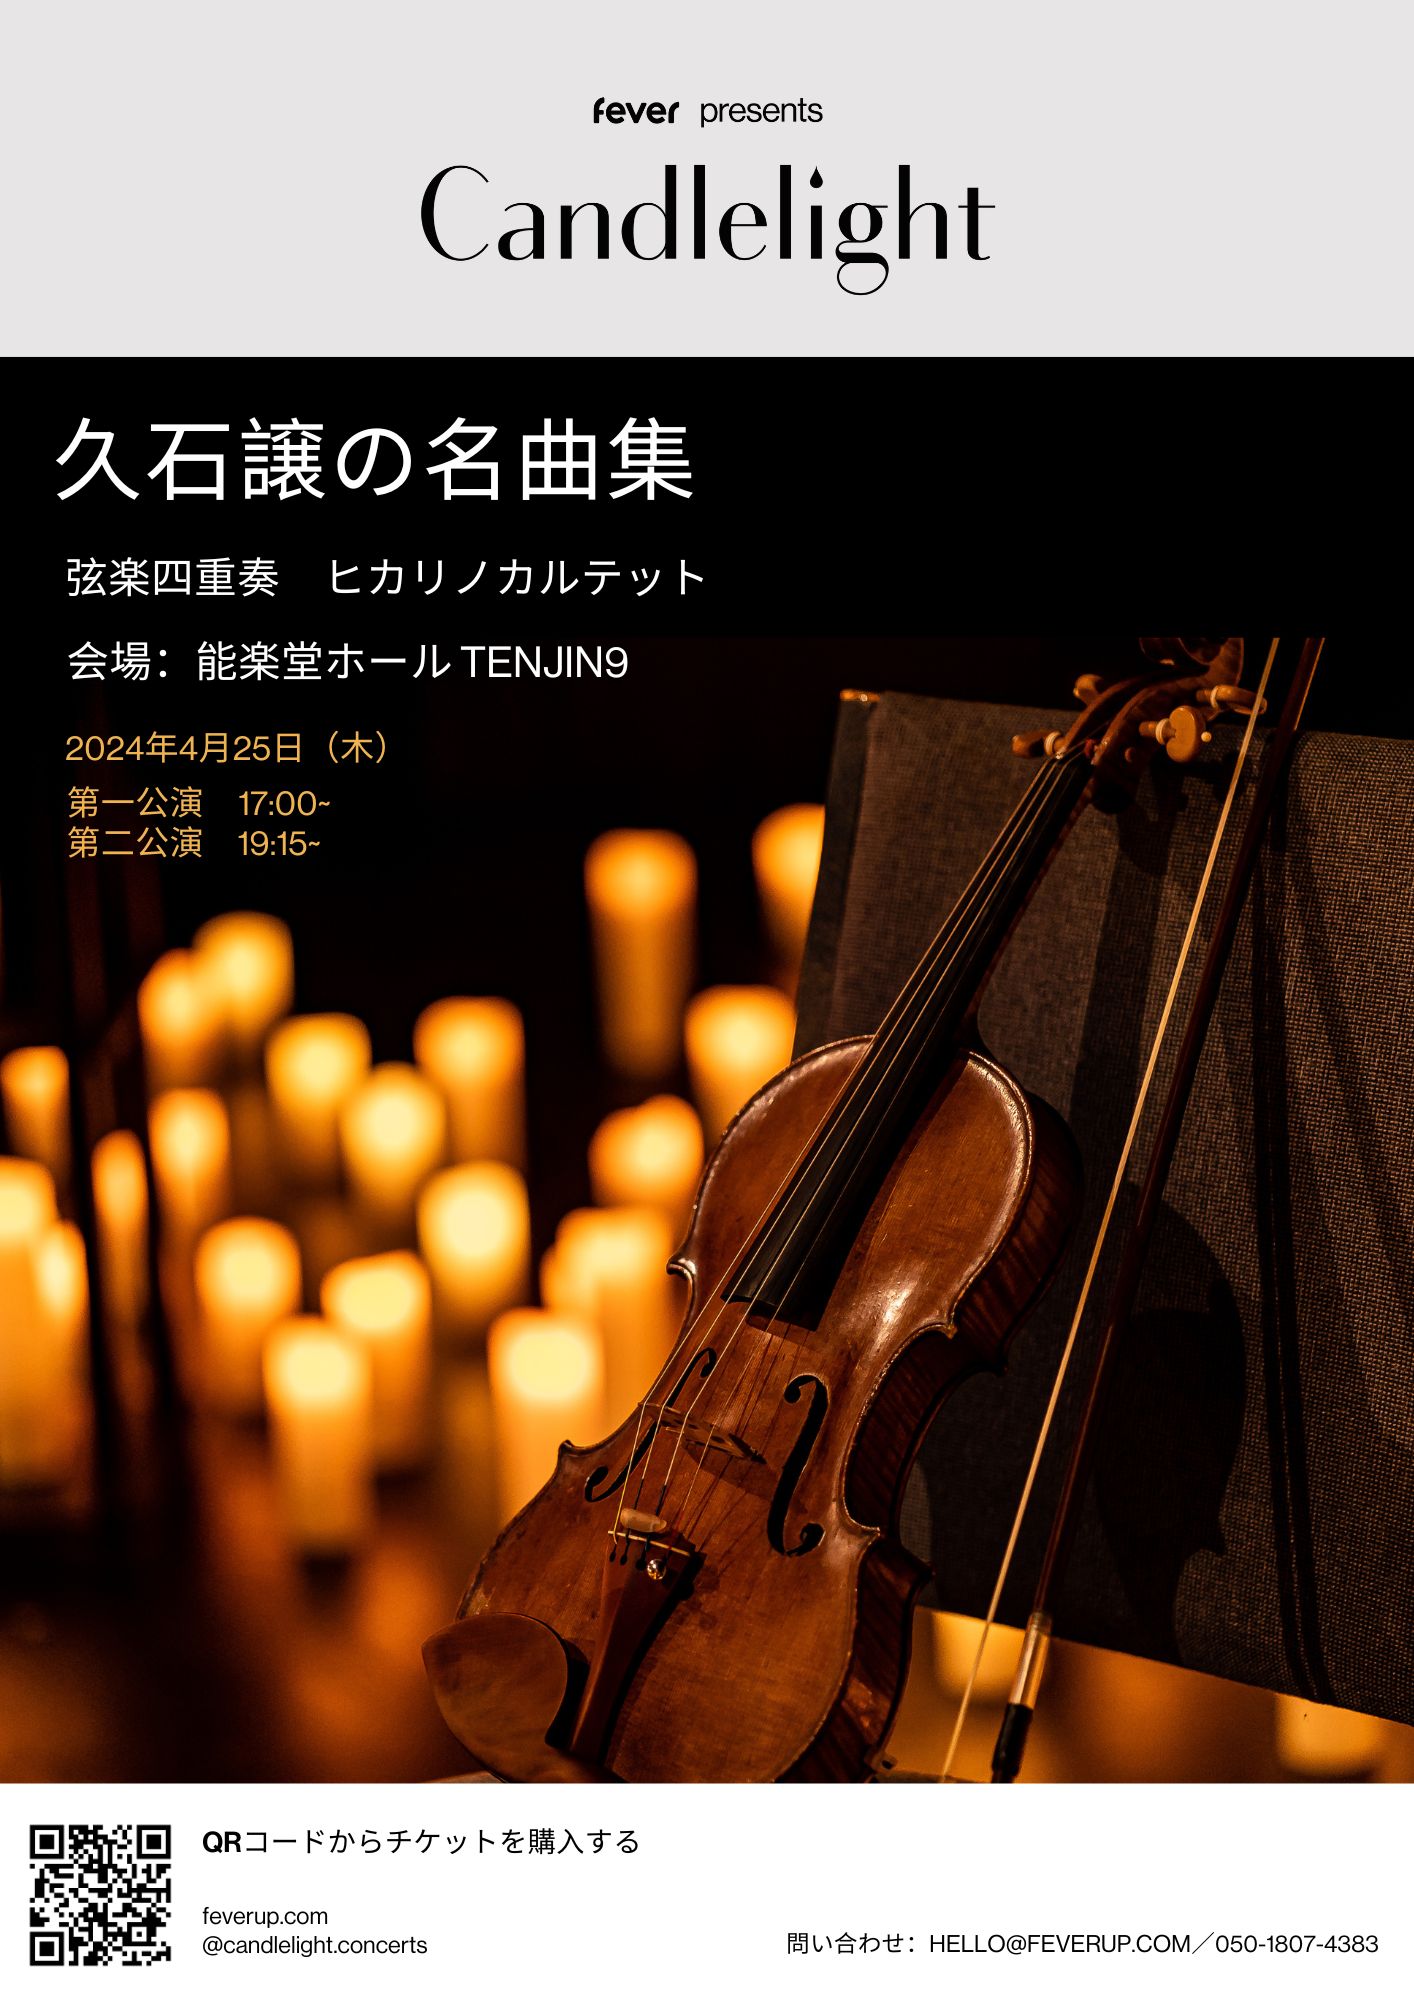 Candlelight: 久石譲の名曲集 at 能楽堂ホールtenjin9